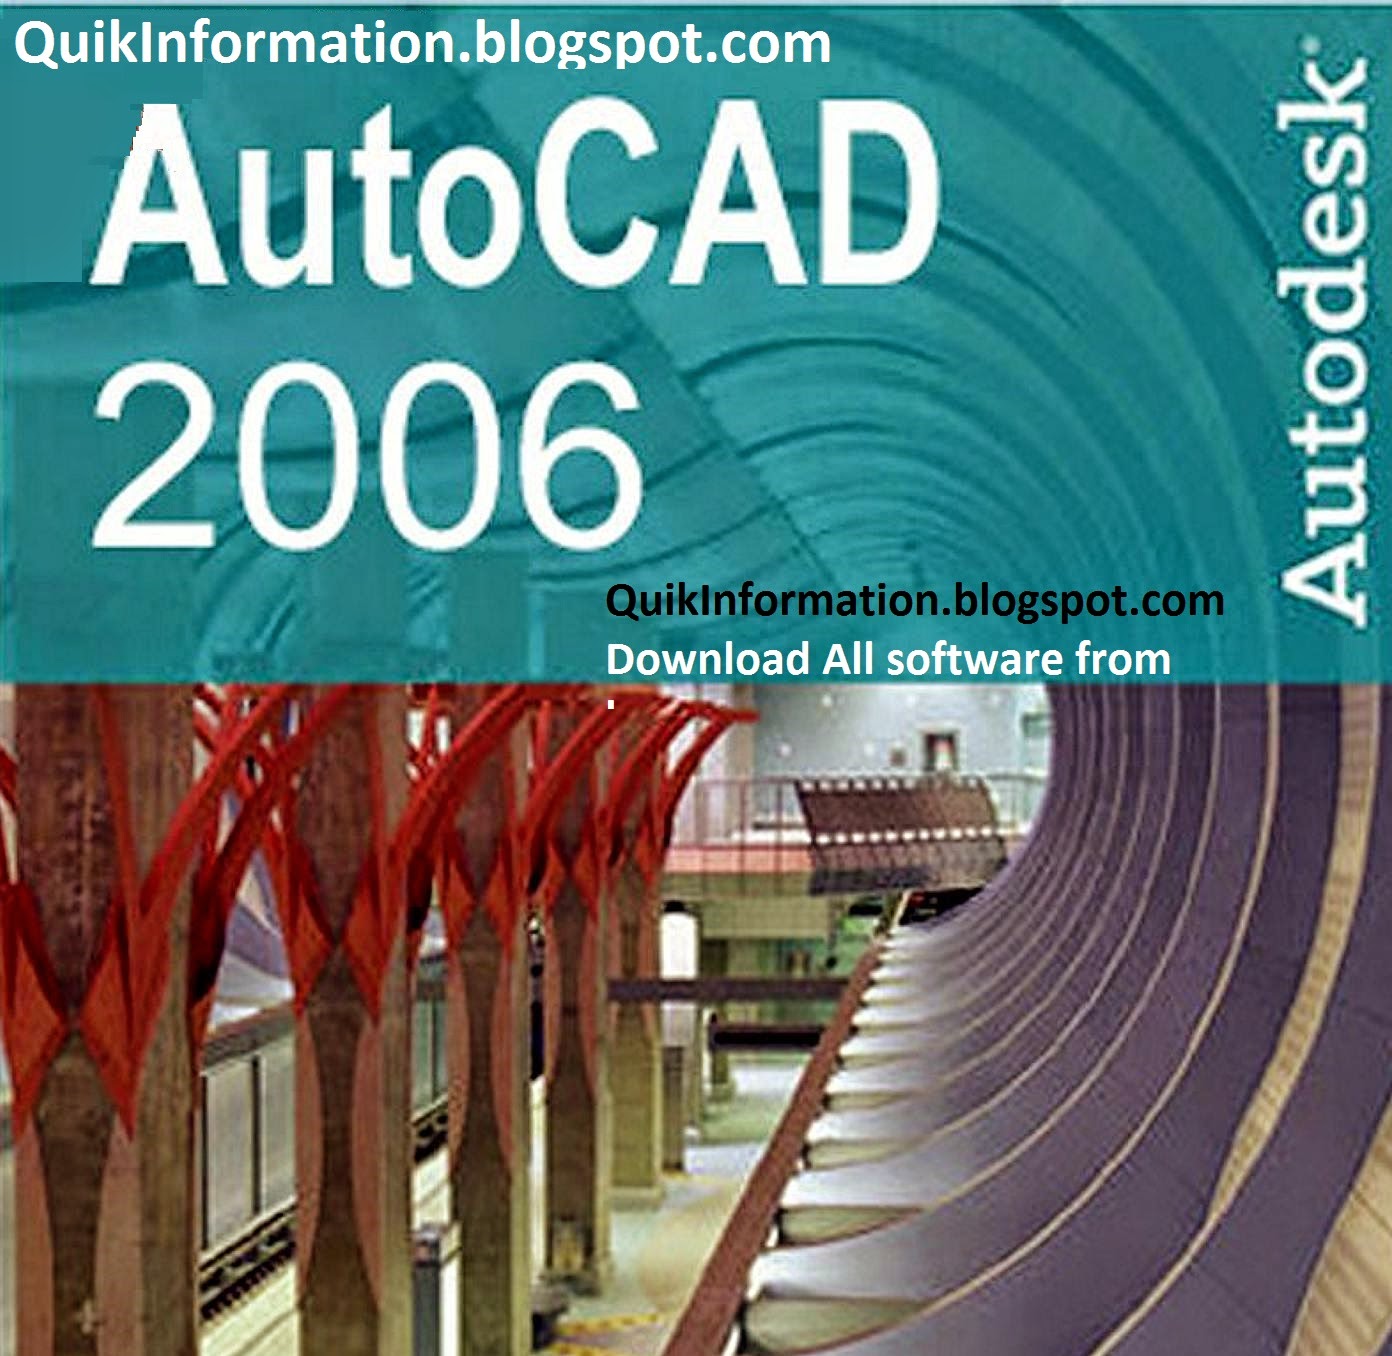 solidworks 2006 full download